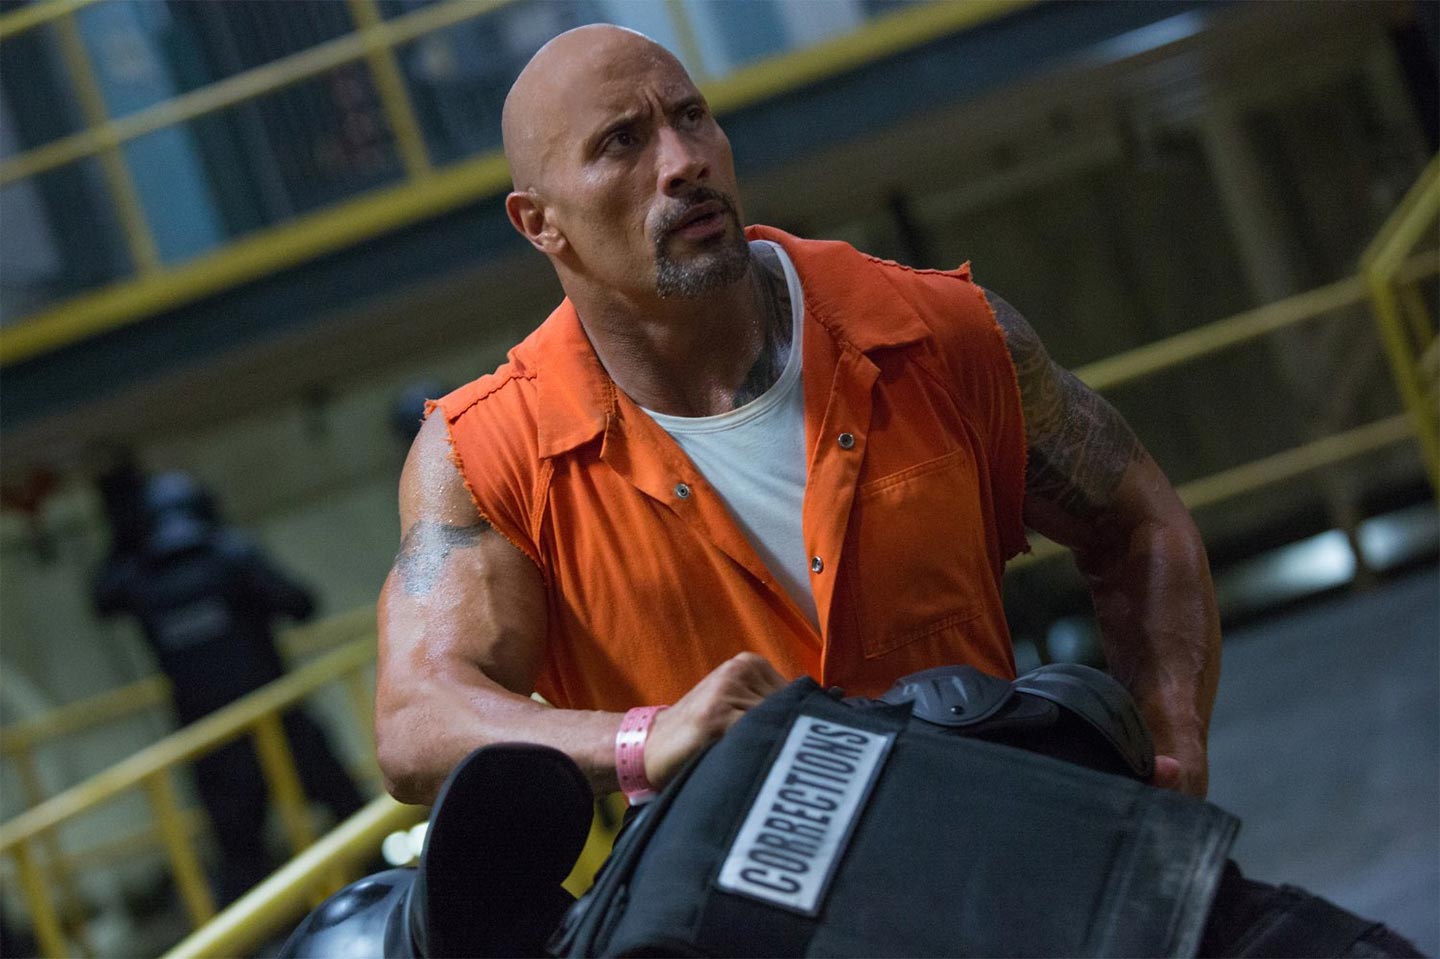 The Fate of the Furious instal the new version for windows